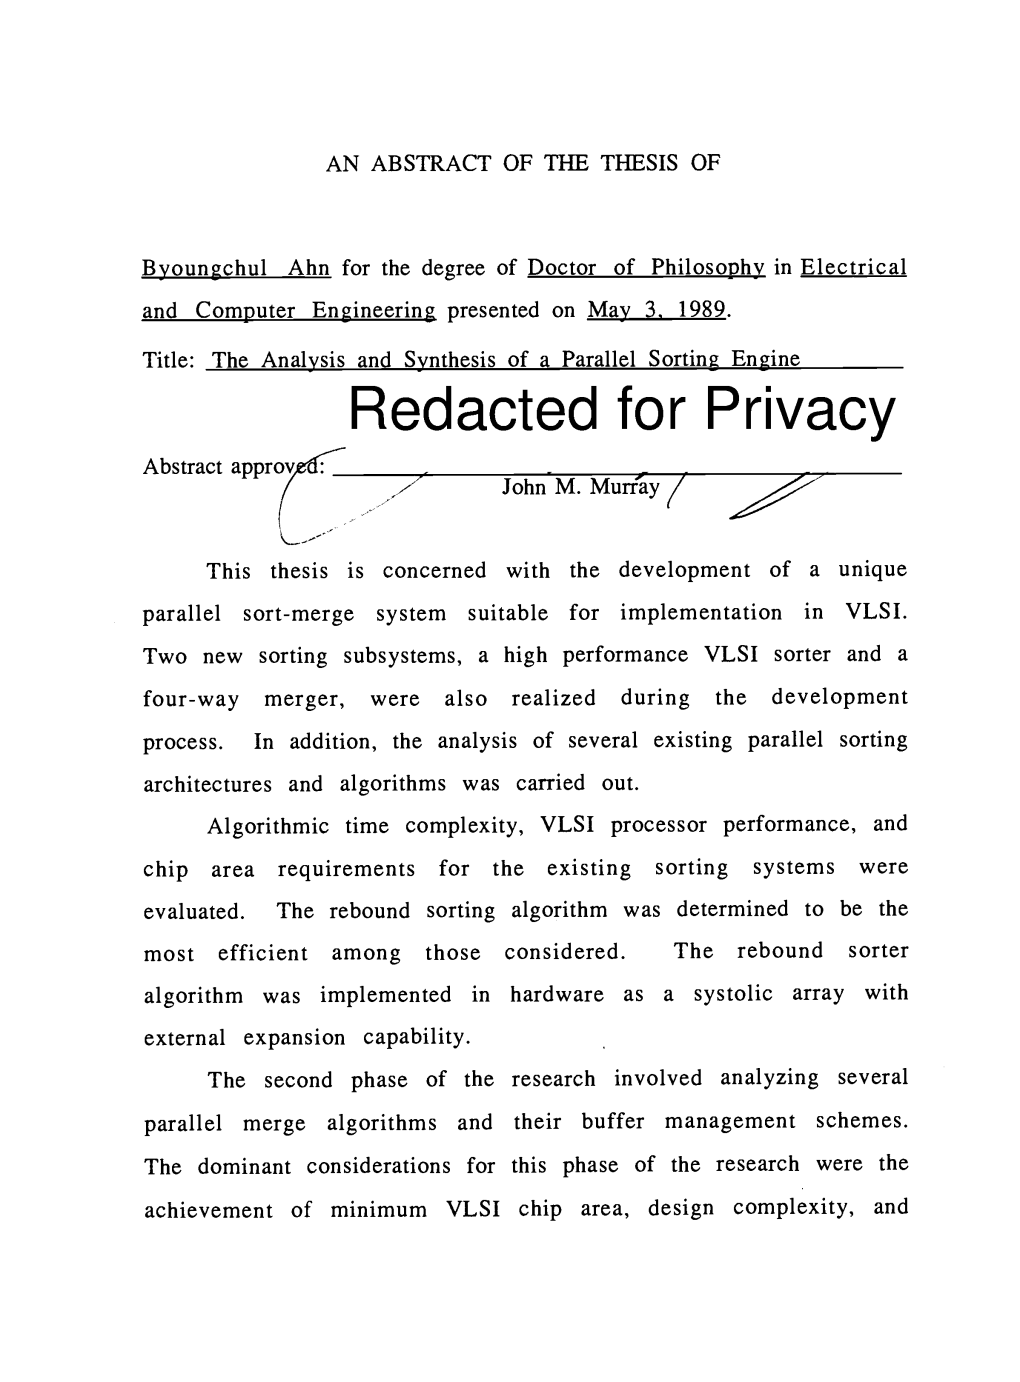 The Analysis and Synthesis of a Parallel Sorting Engine Redacted for Privacy Abstract Approv, John M